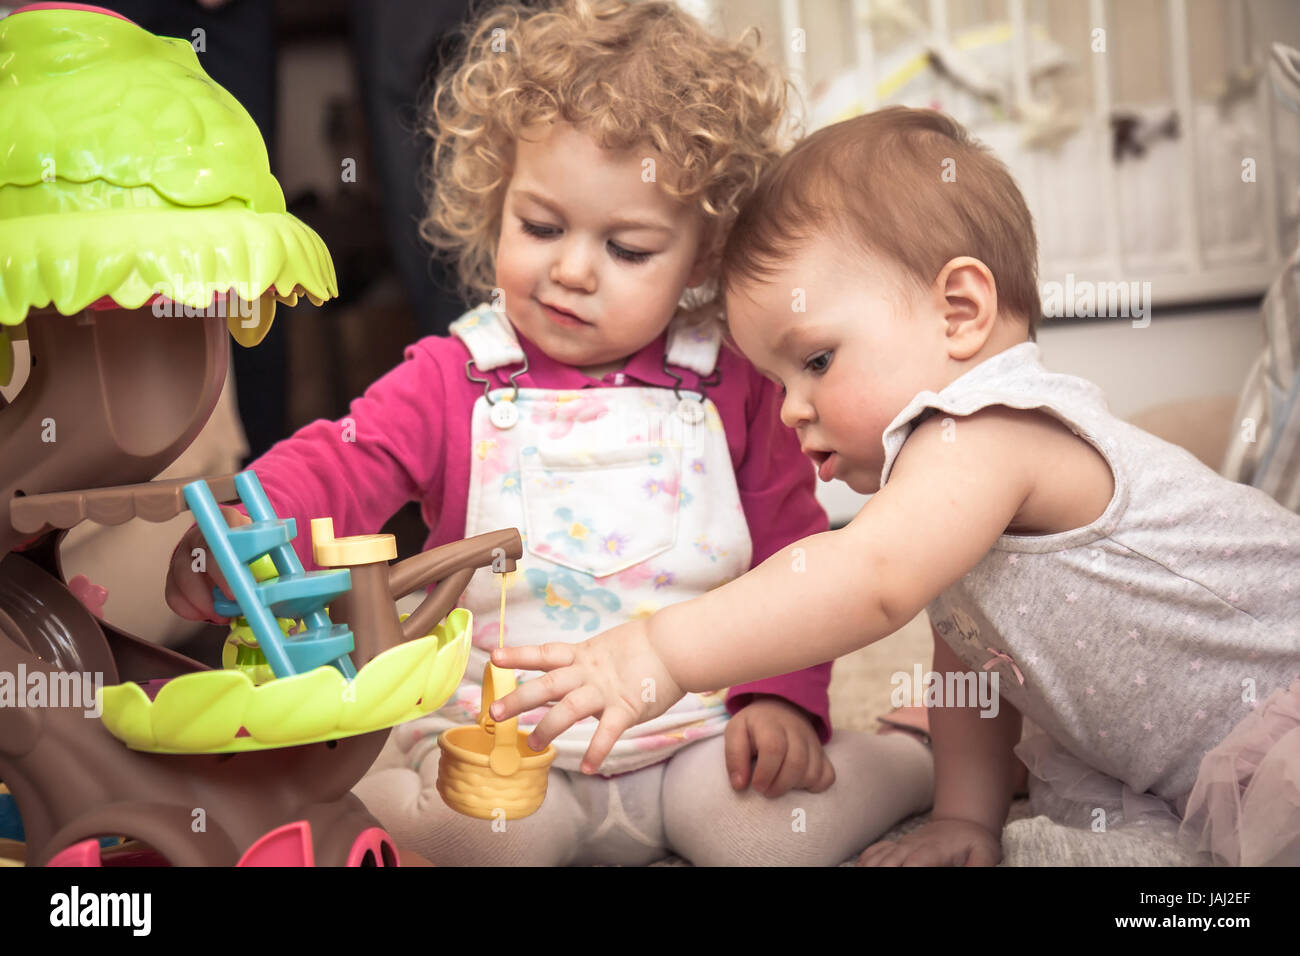 Children playing together in kids rooms with toys symbolizing children communication and happy childhood Stock Photo